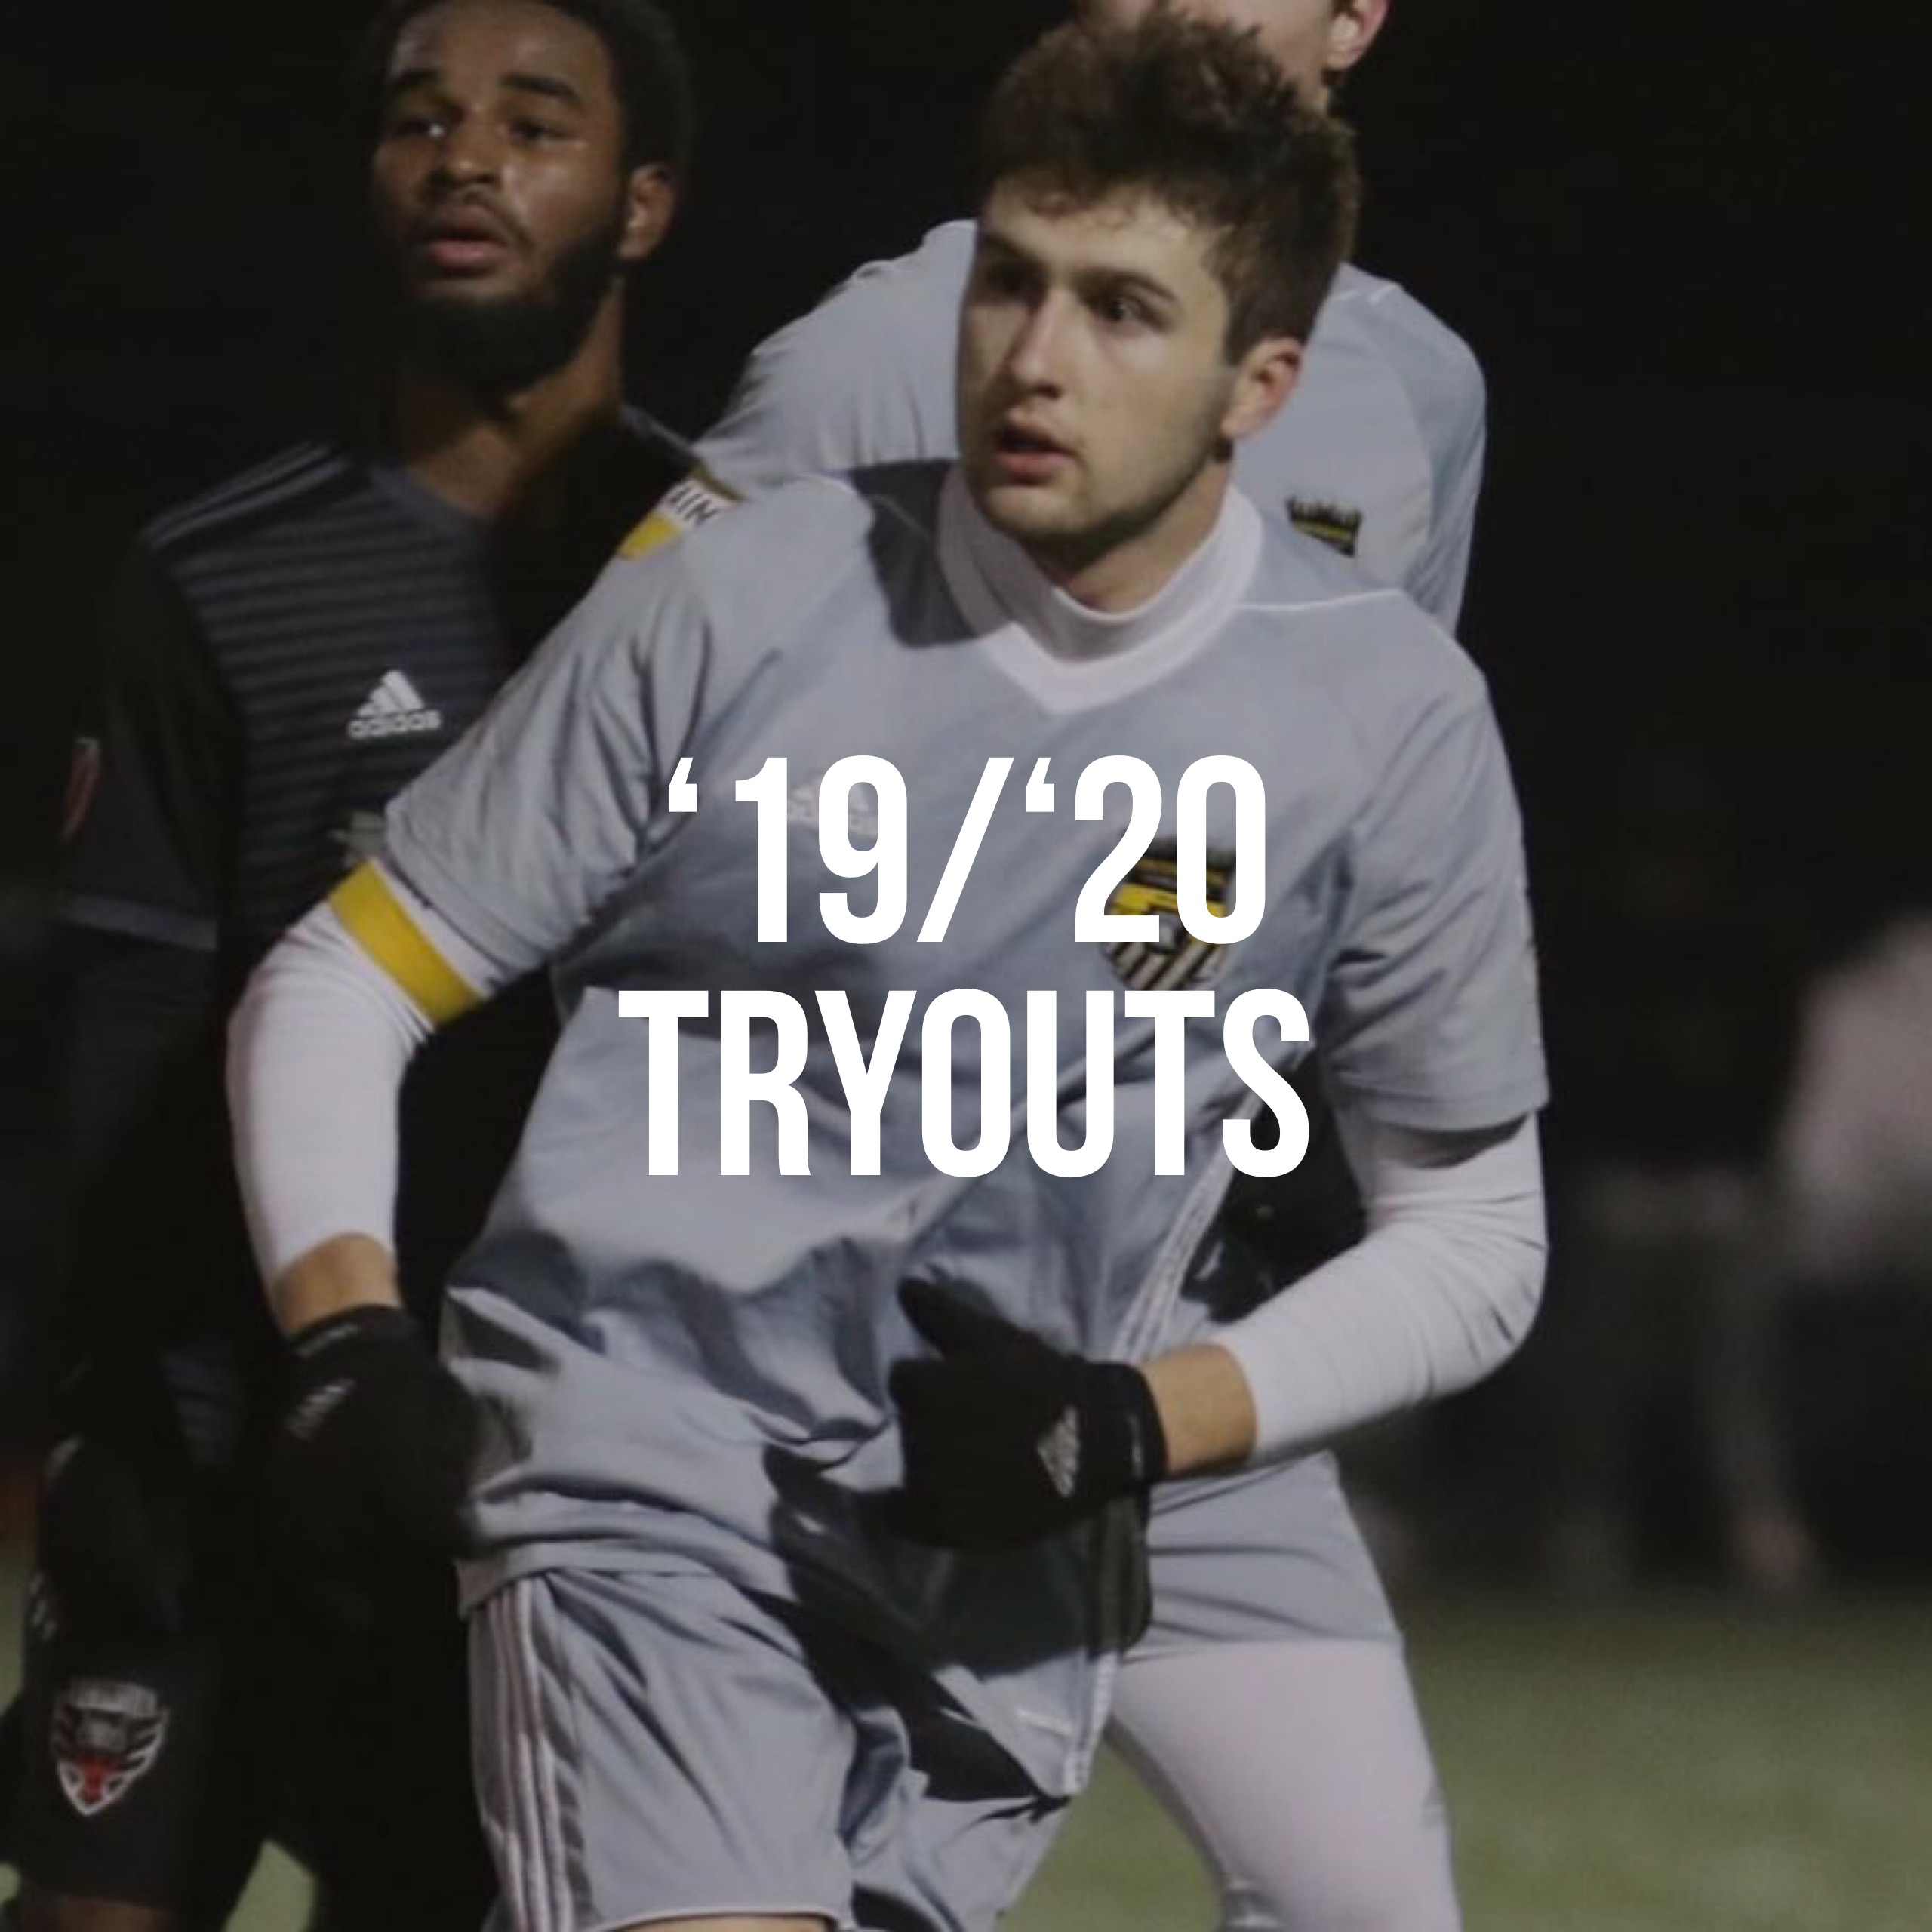 '19/20 Tryouts